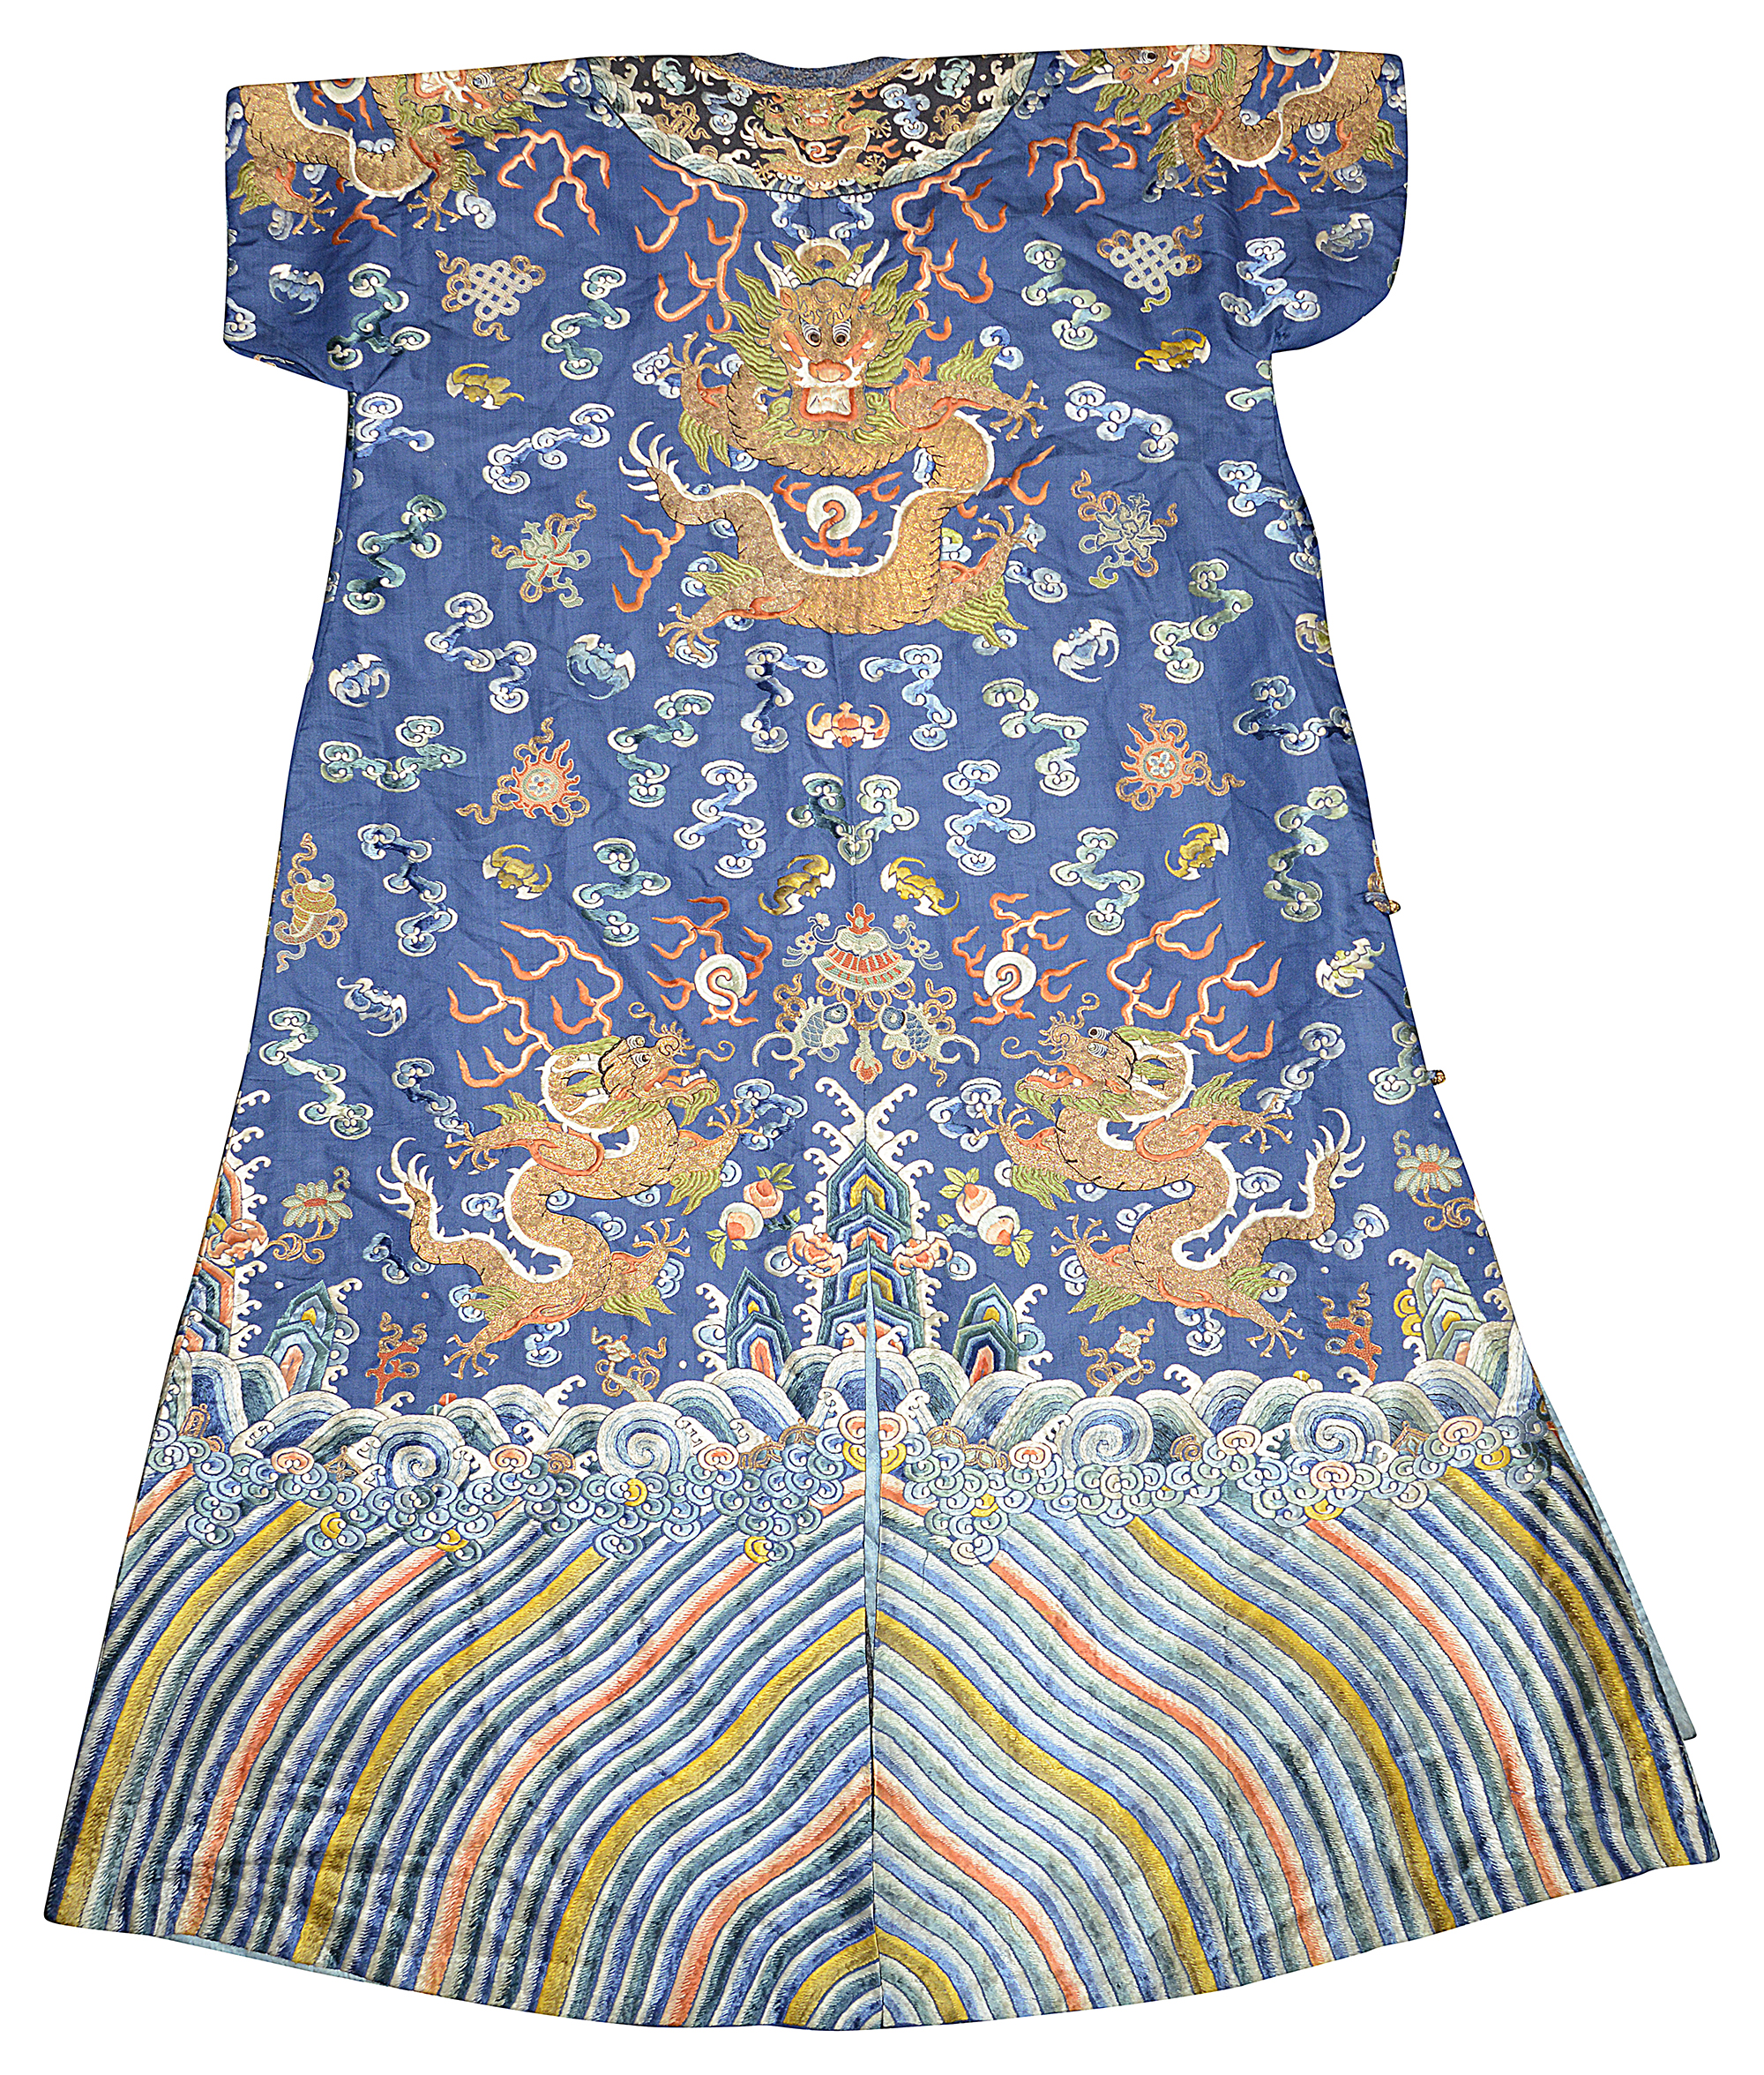 A late 19th/early 20th century embroidered Chinese silk robe - Image 2 of 7